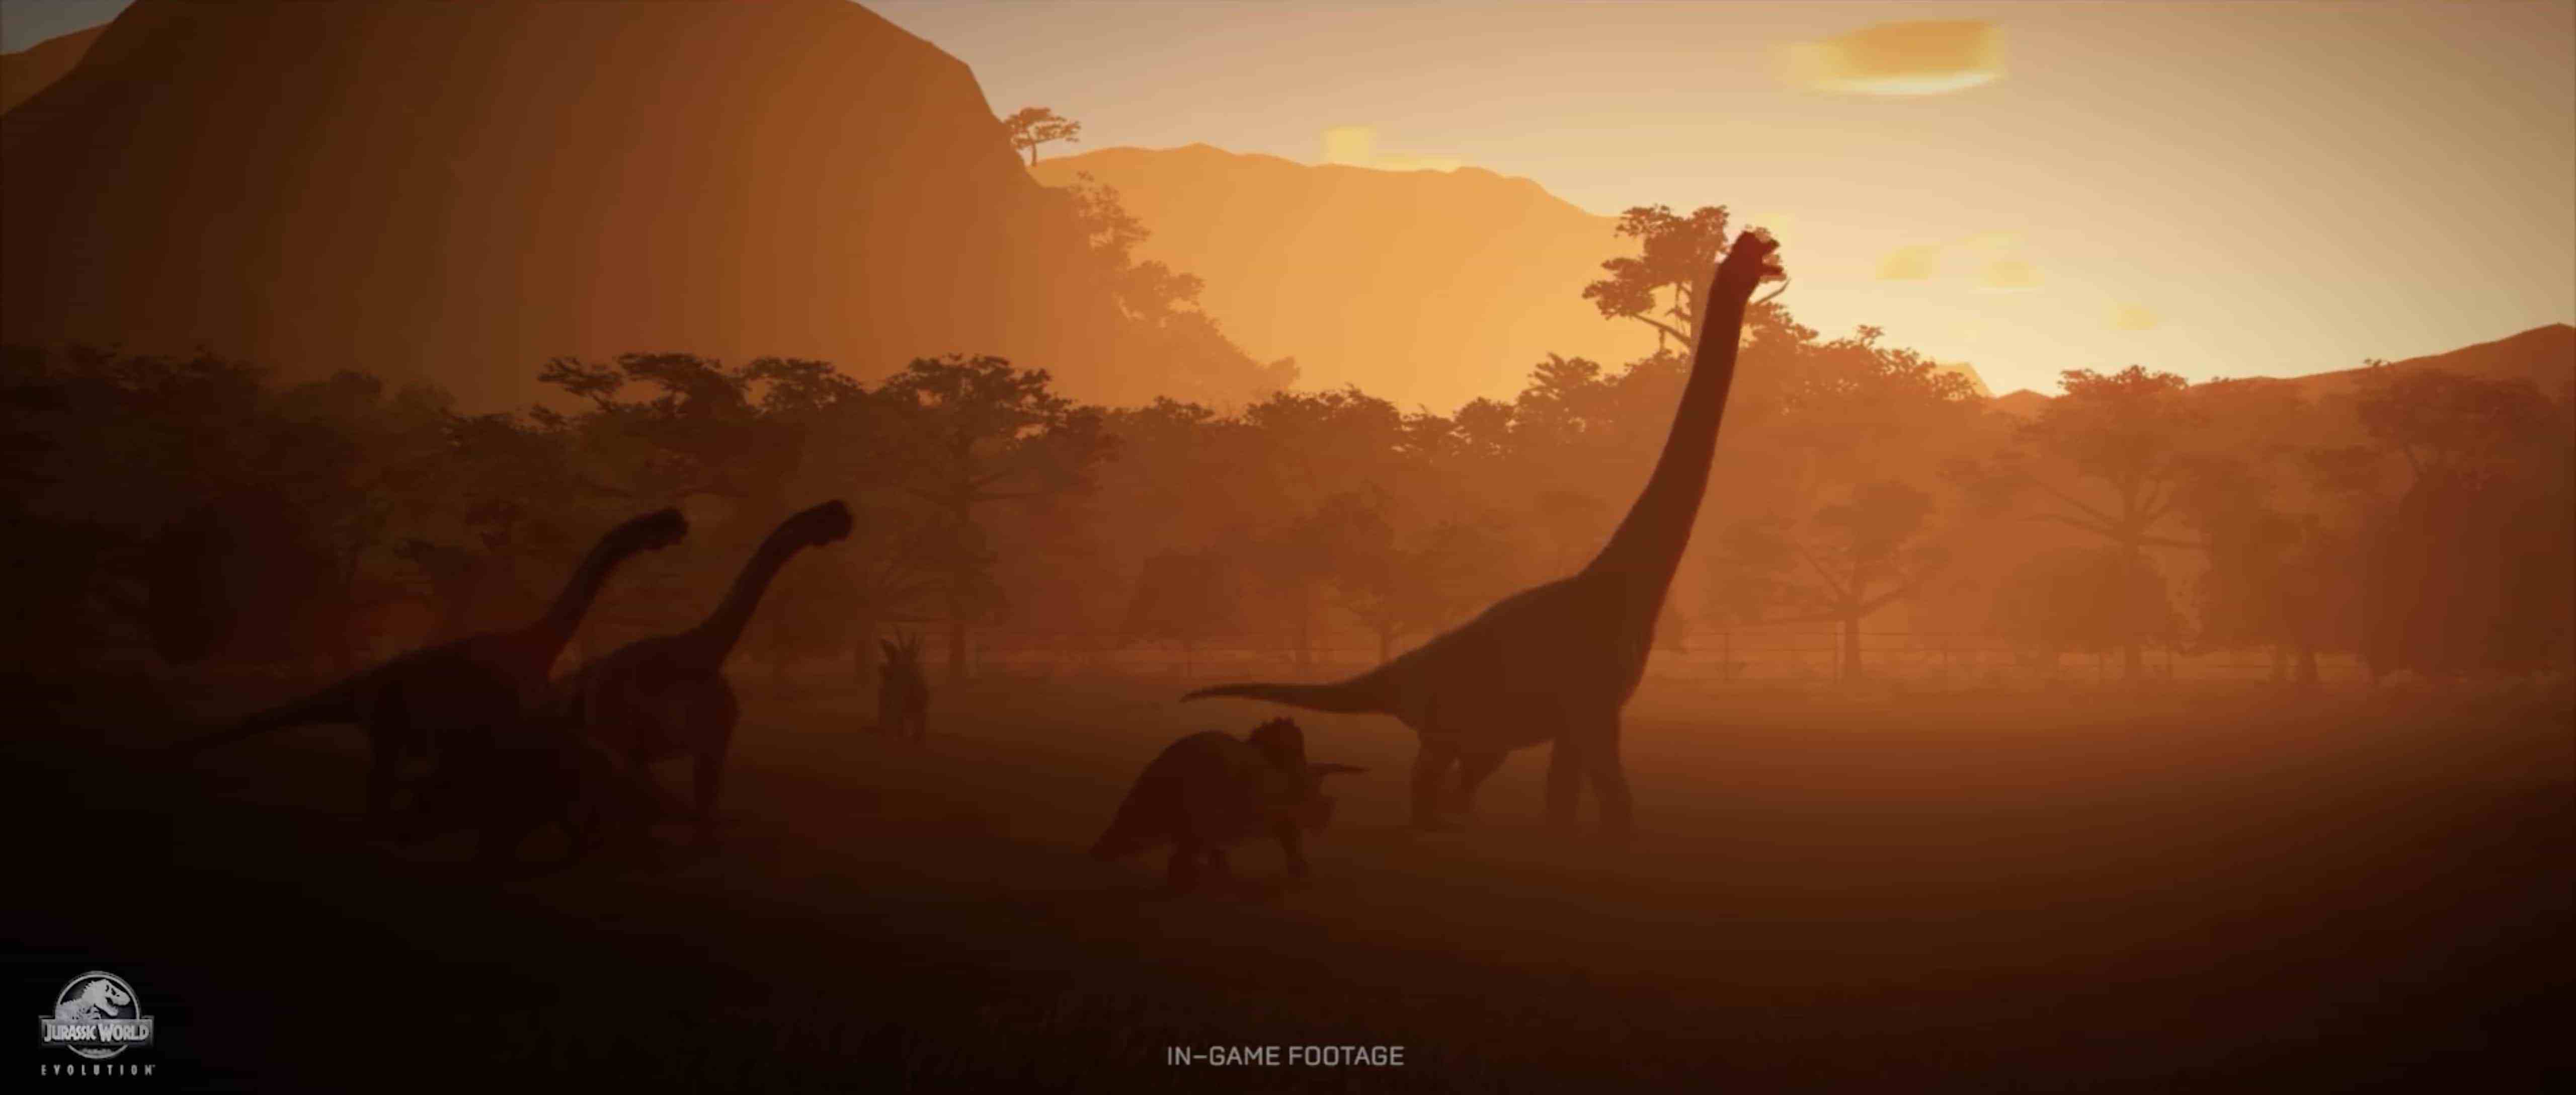 Jurassic World Evolution's First In Game Footage Is Wondrous